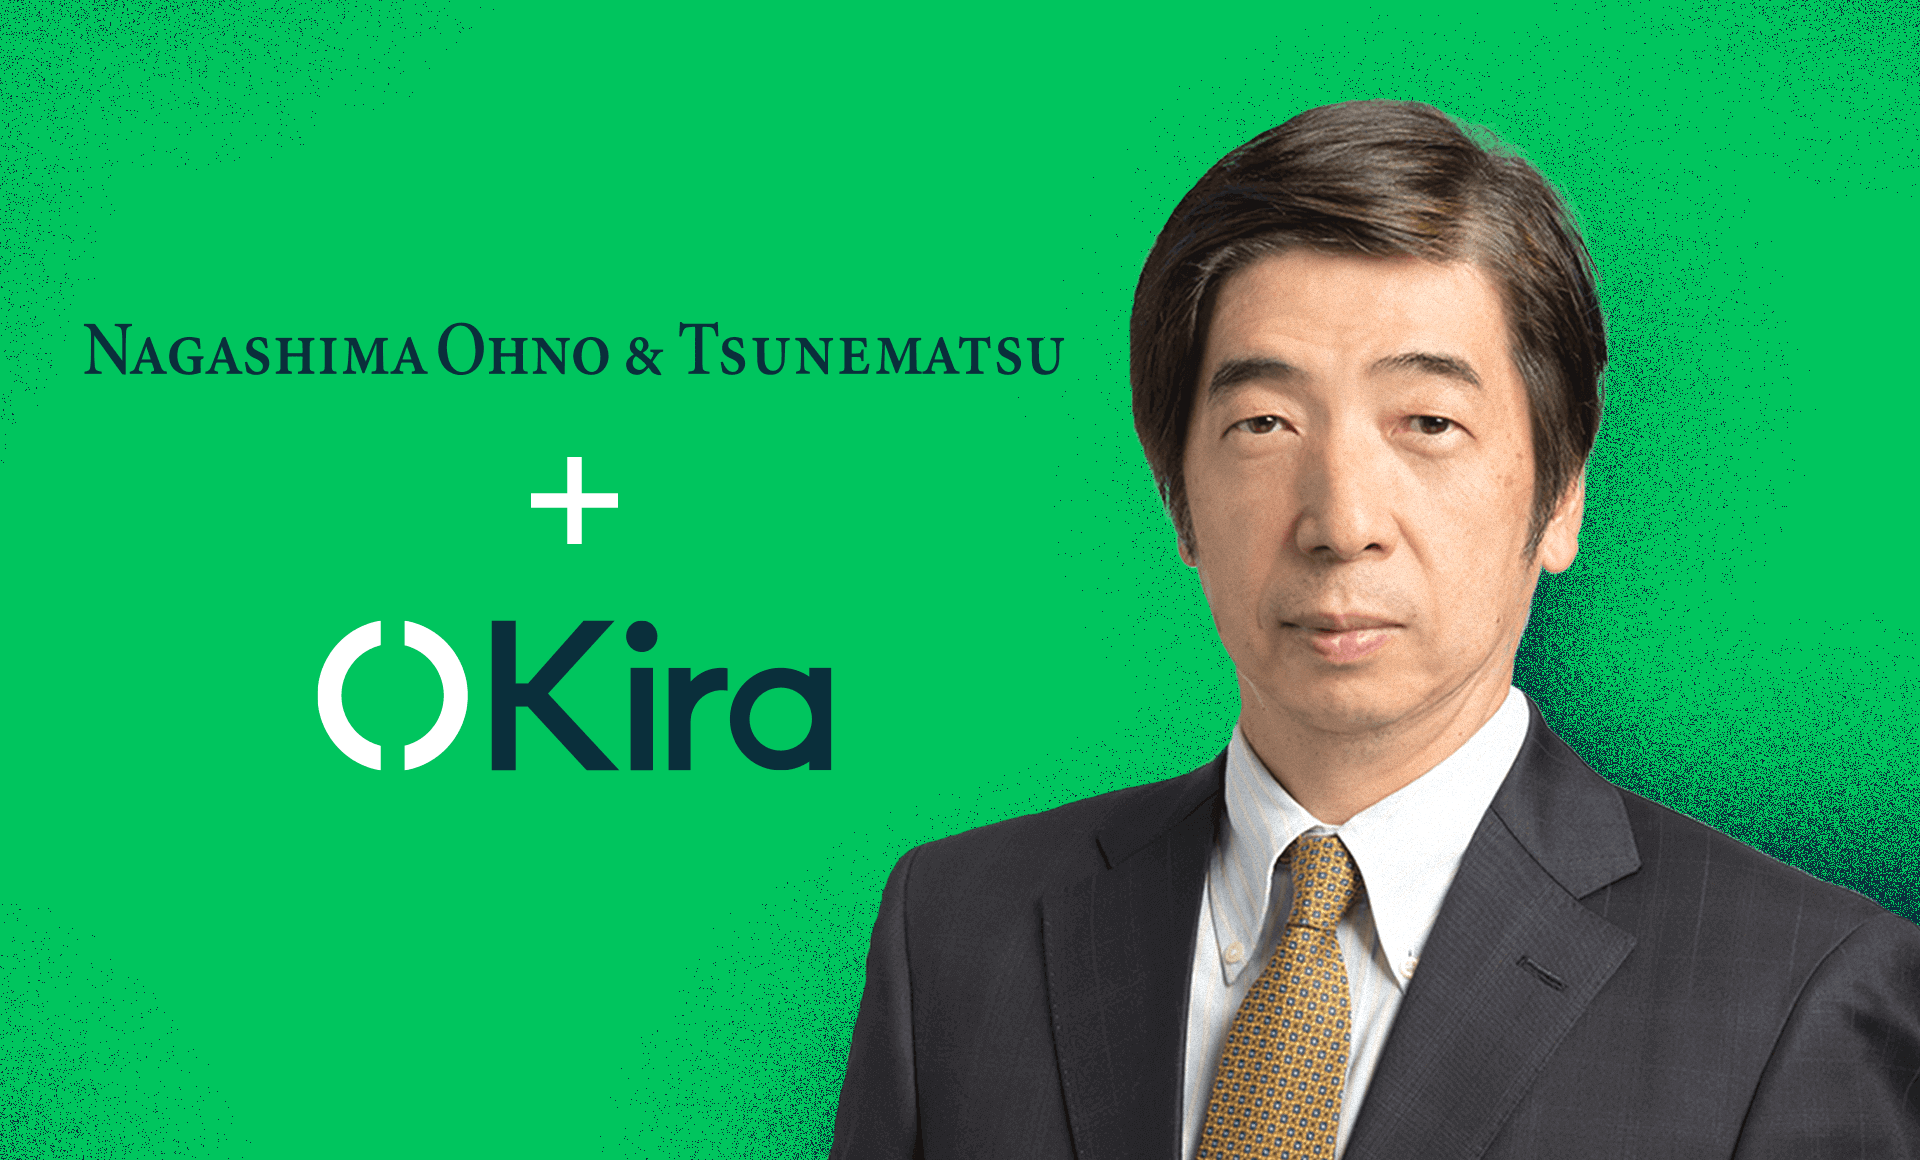 Read more about Nagashima Ohno & Tsunematsu is the First Law Firm in Japan to Adopt Kira Across its Mergers and Acquisitions Practice 